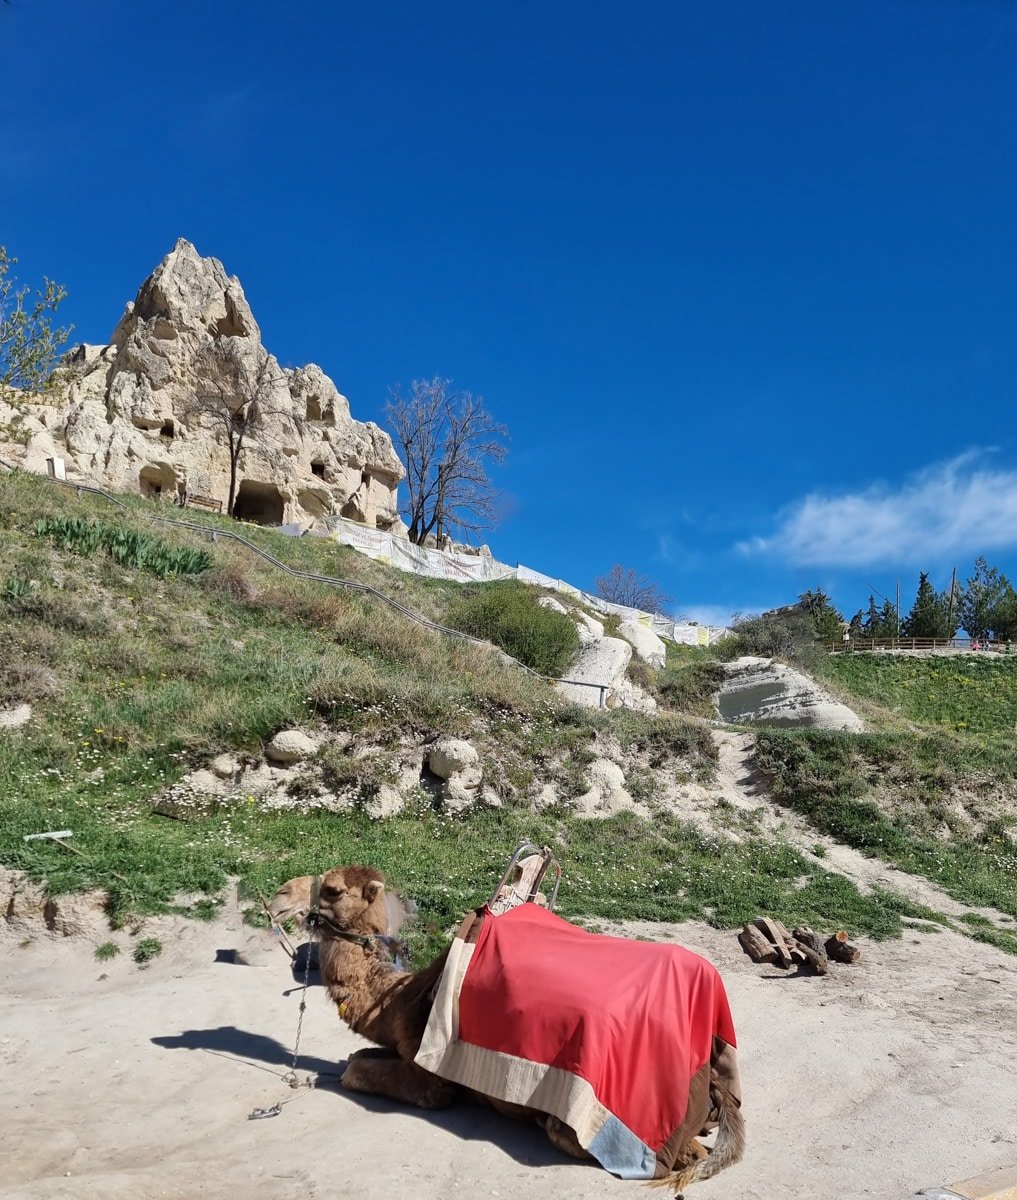 A camel lying on grass with a red blanket, with unique rock formations in Goreme, Cappadocia, and a clear blue sky in the background.